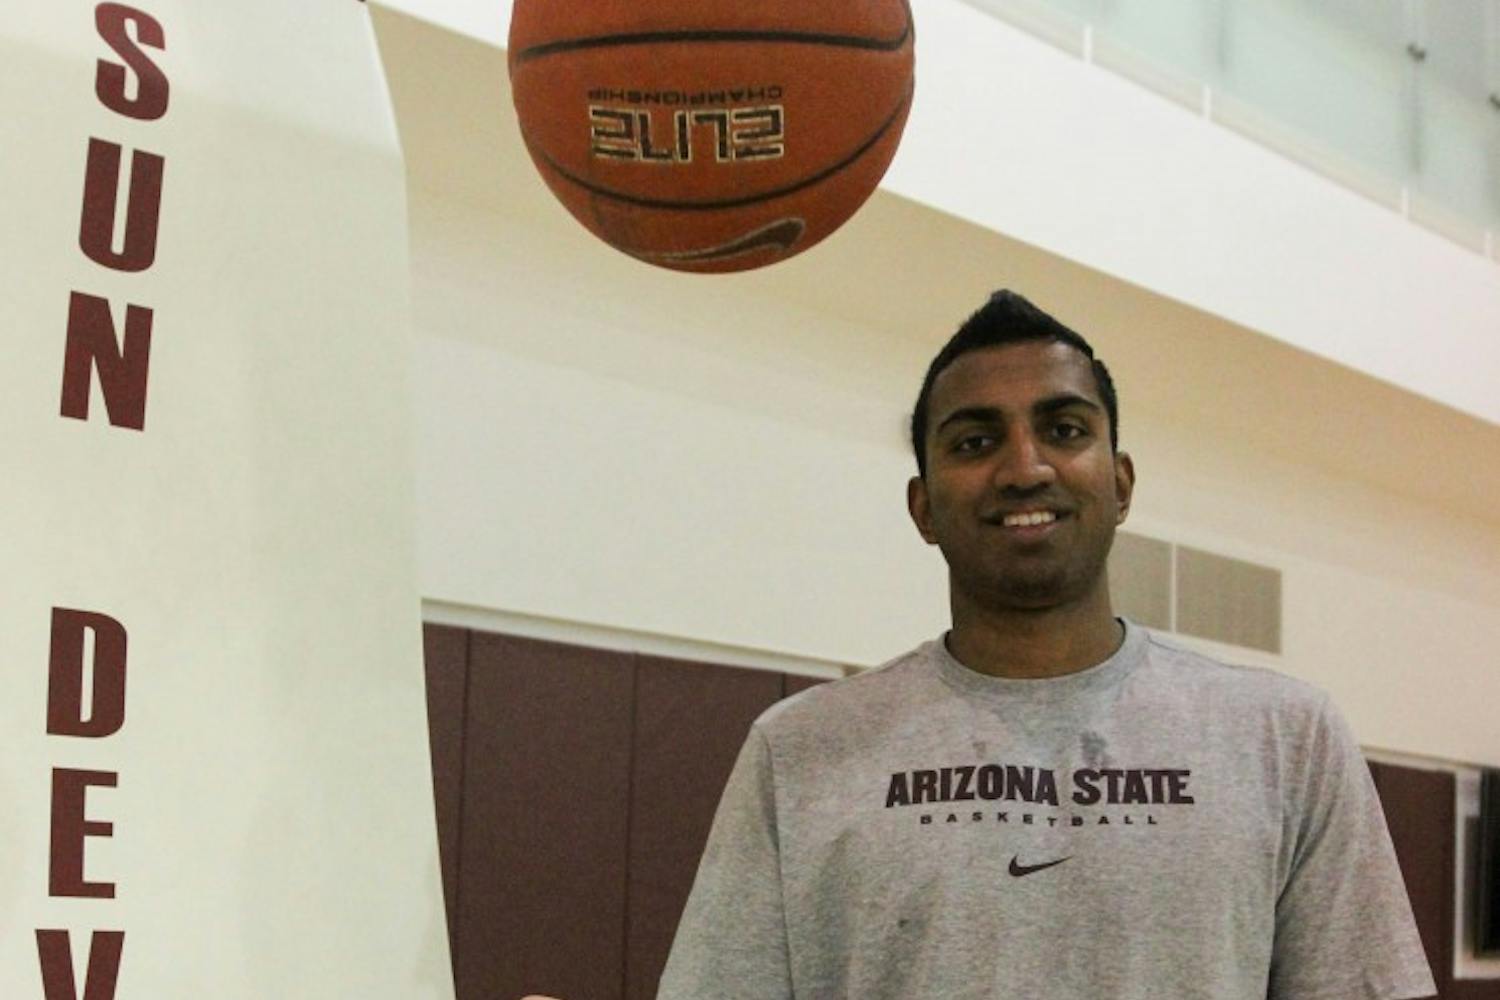 Sai Tummala, ASU's newest basketball recruit, tosses a basketball up in the air during a workout at the Tempe campus training facility. Tummala plans on studying medicine while playing for the team next semester. (Photo by Dominic Valente)